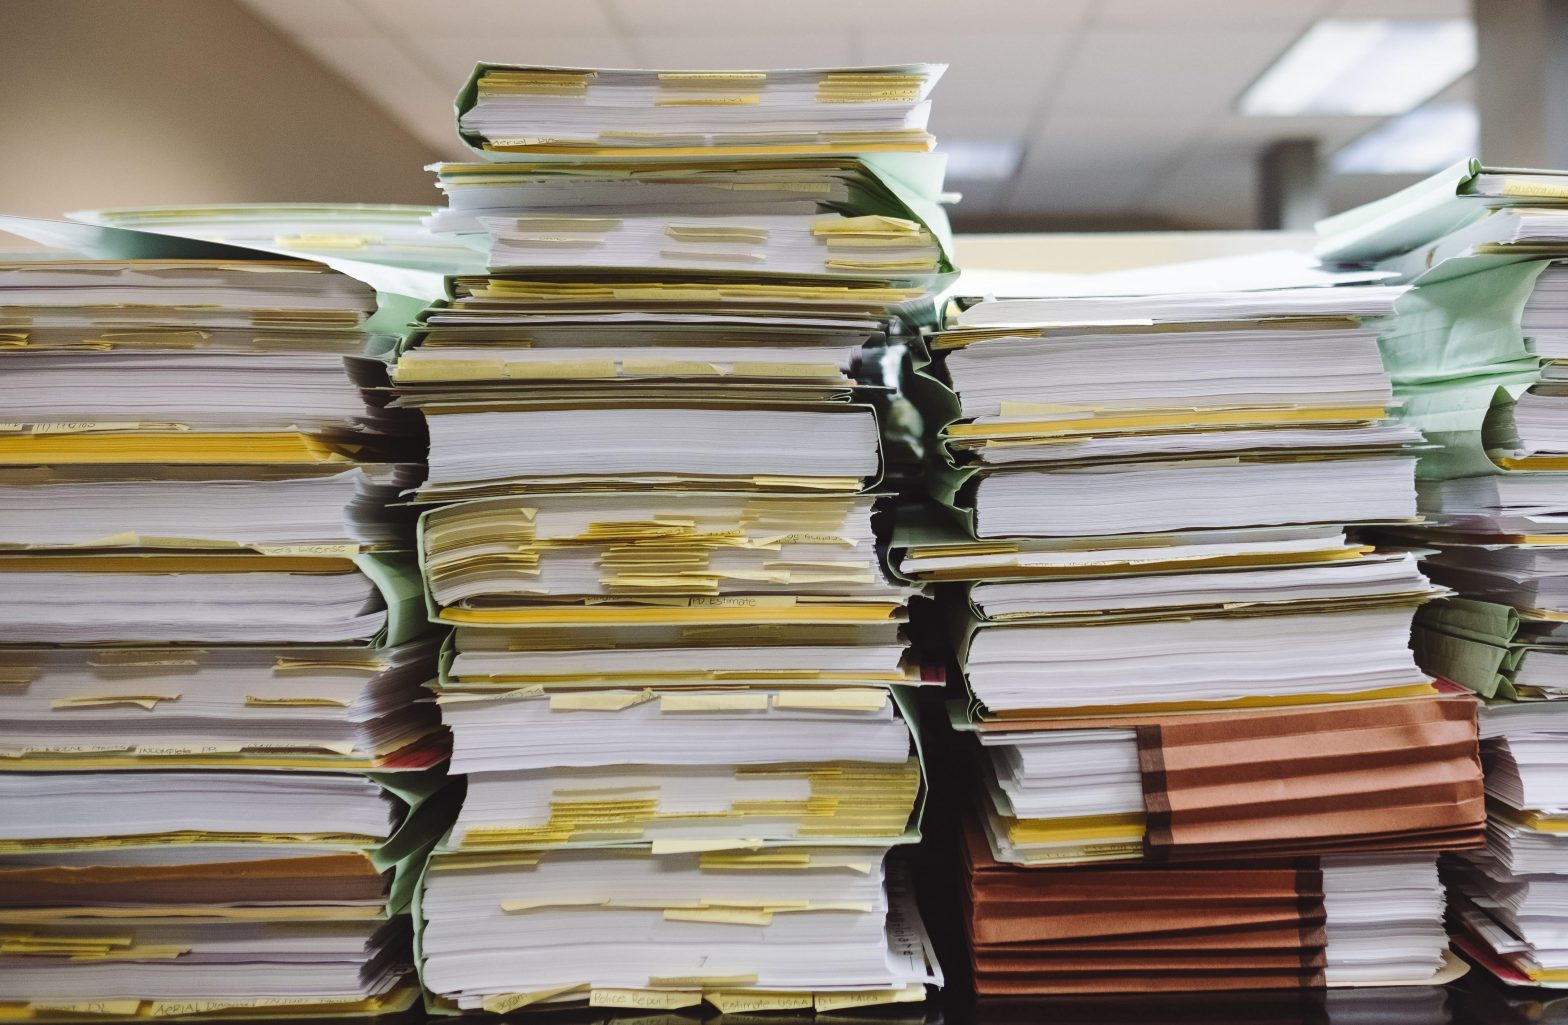 4 Major Criteria When Looking For an Intelligent Document Management System